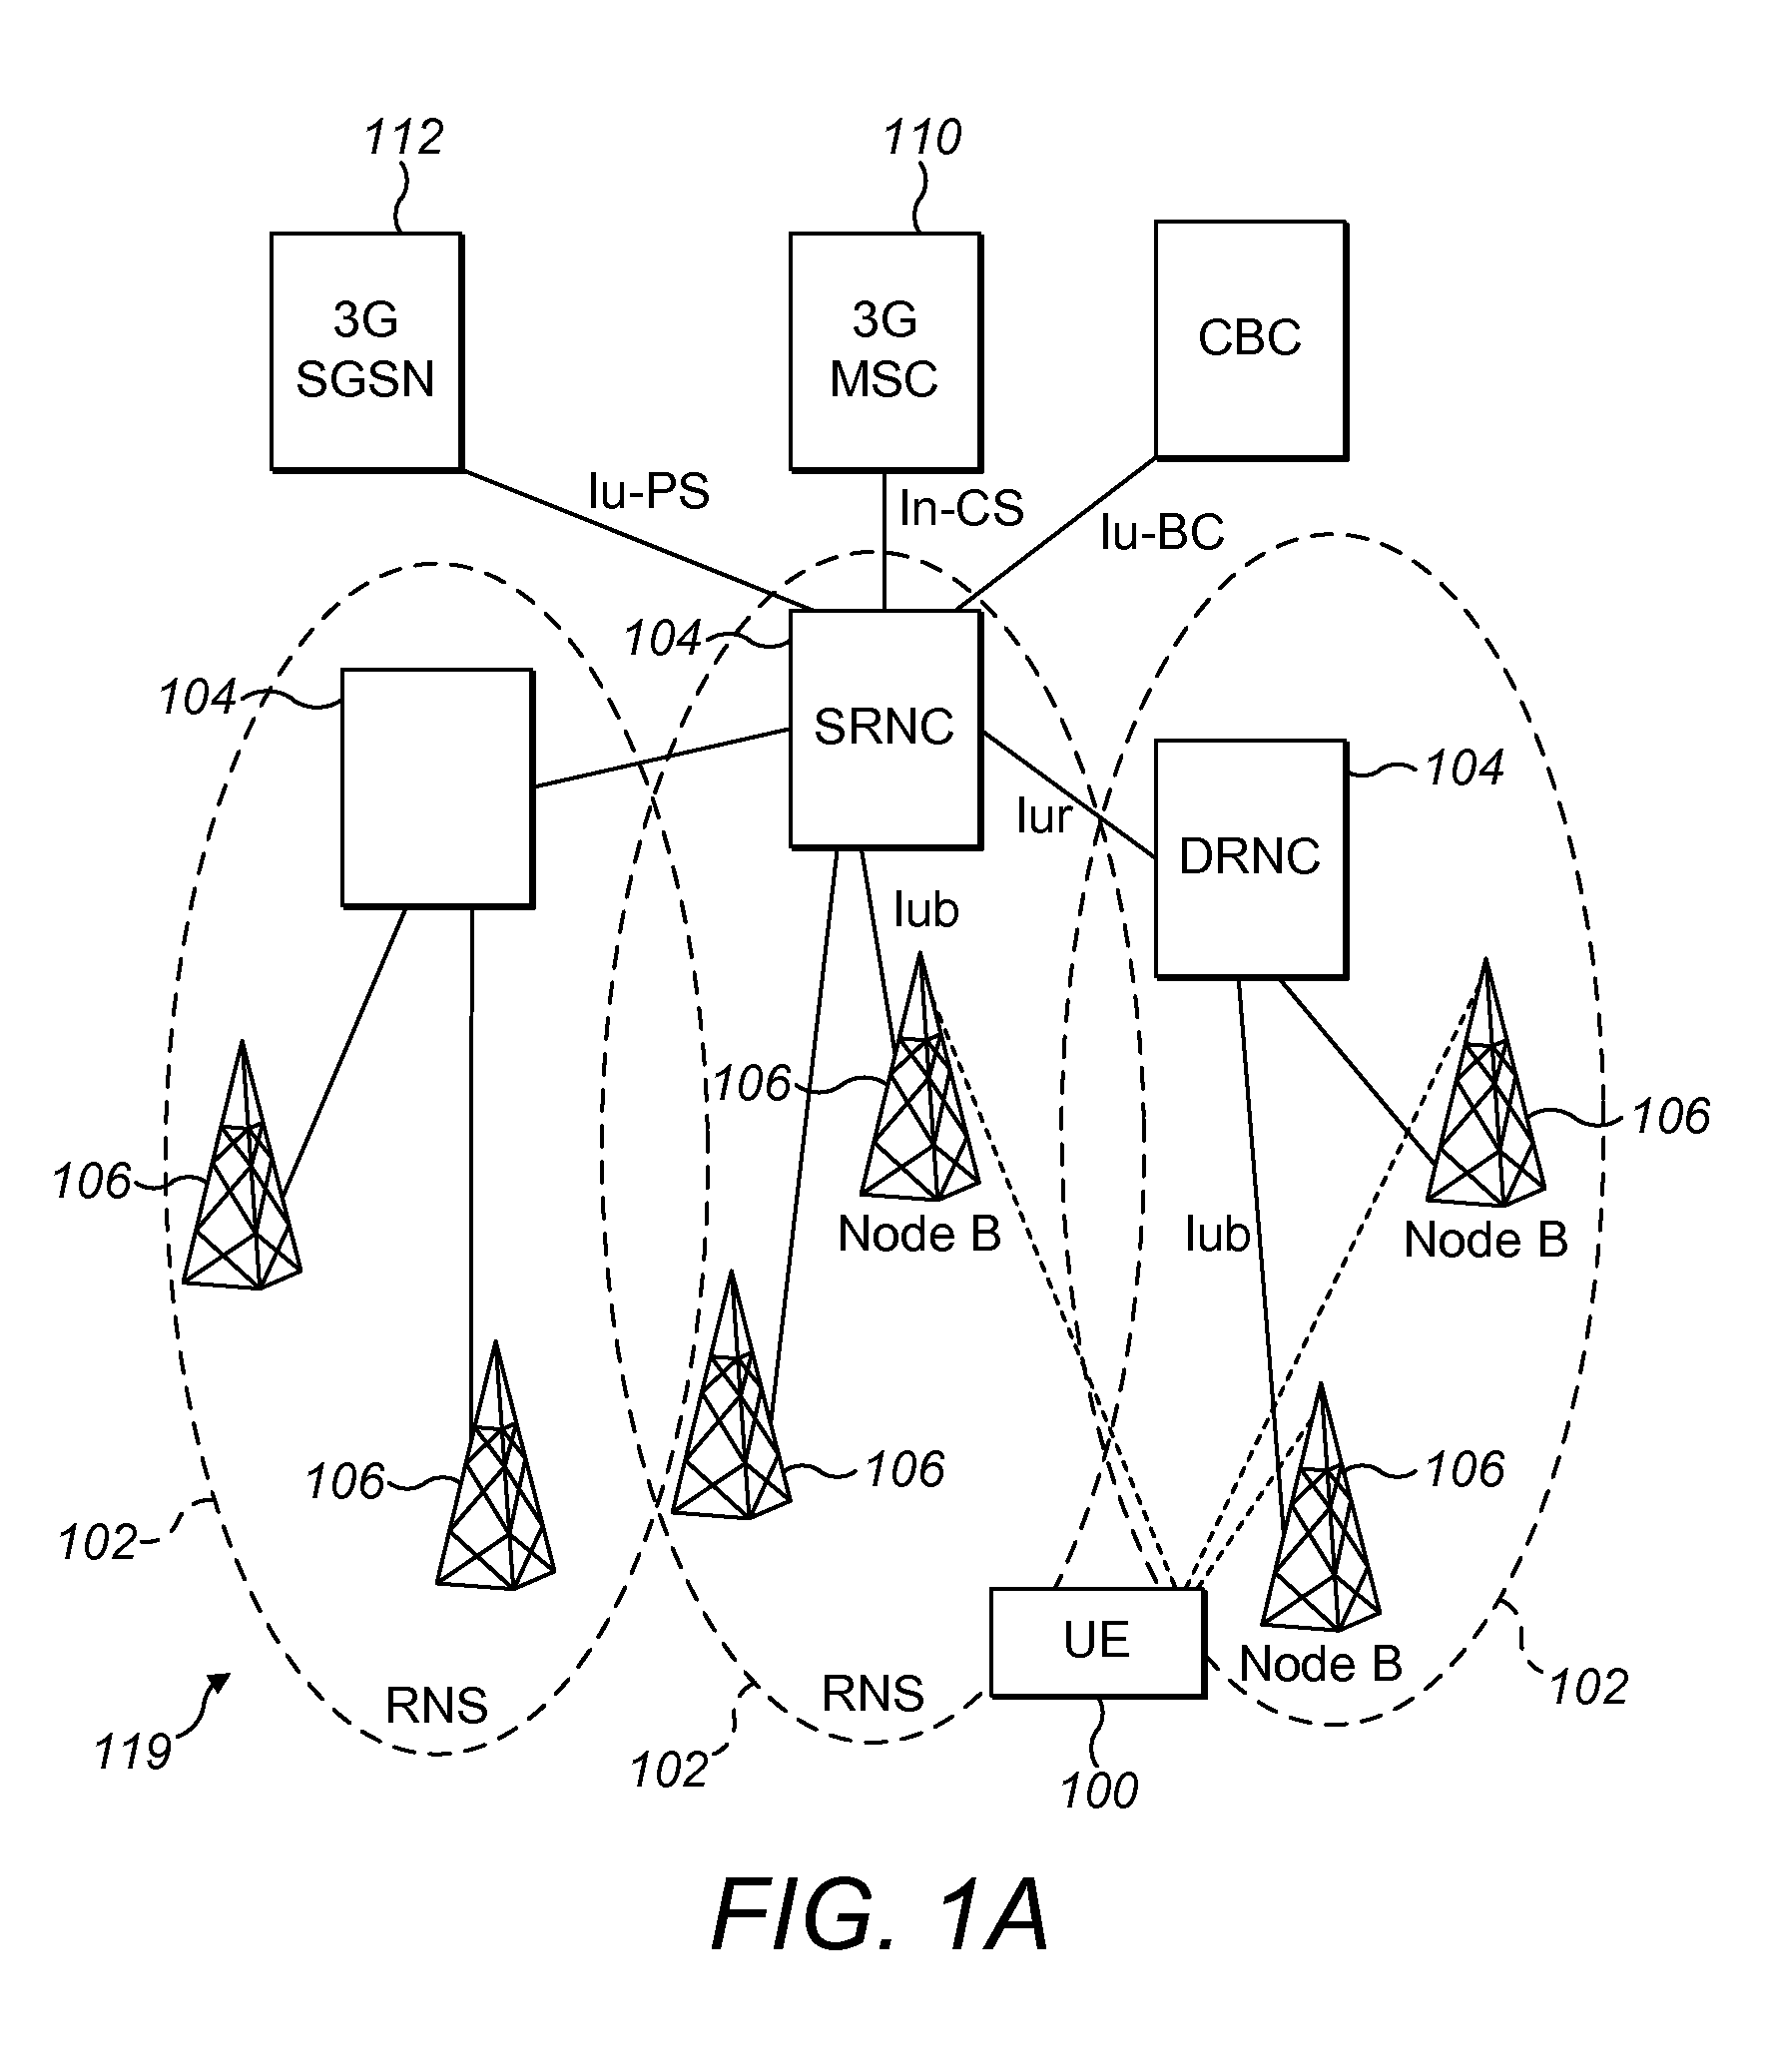 Cell re-selection in a cellular telecommunications network